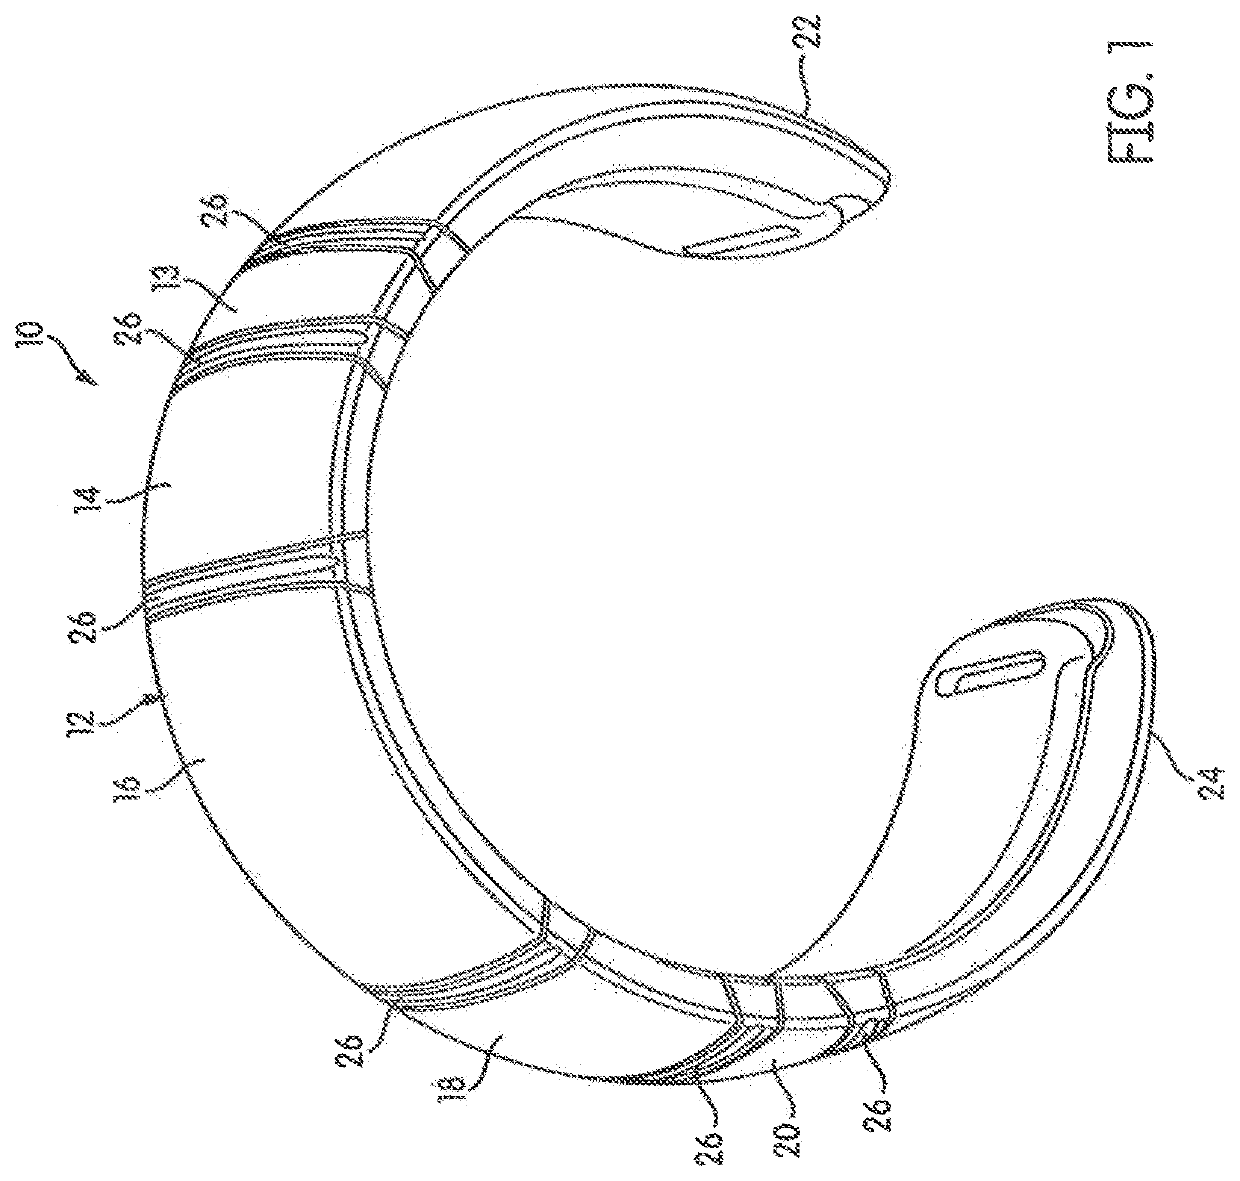 Functional, socially-enabled jewelry and systems for multi-device interaction